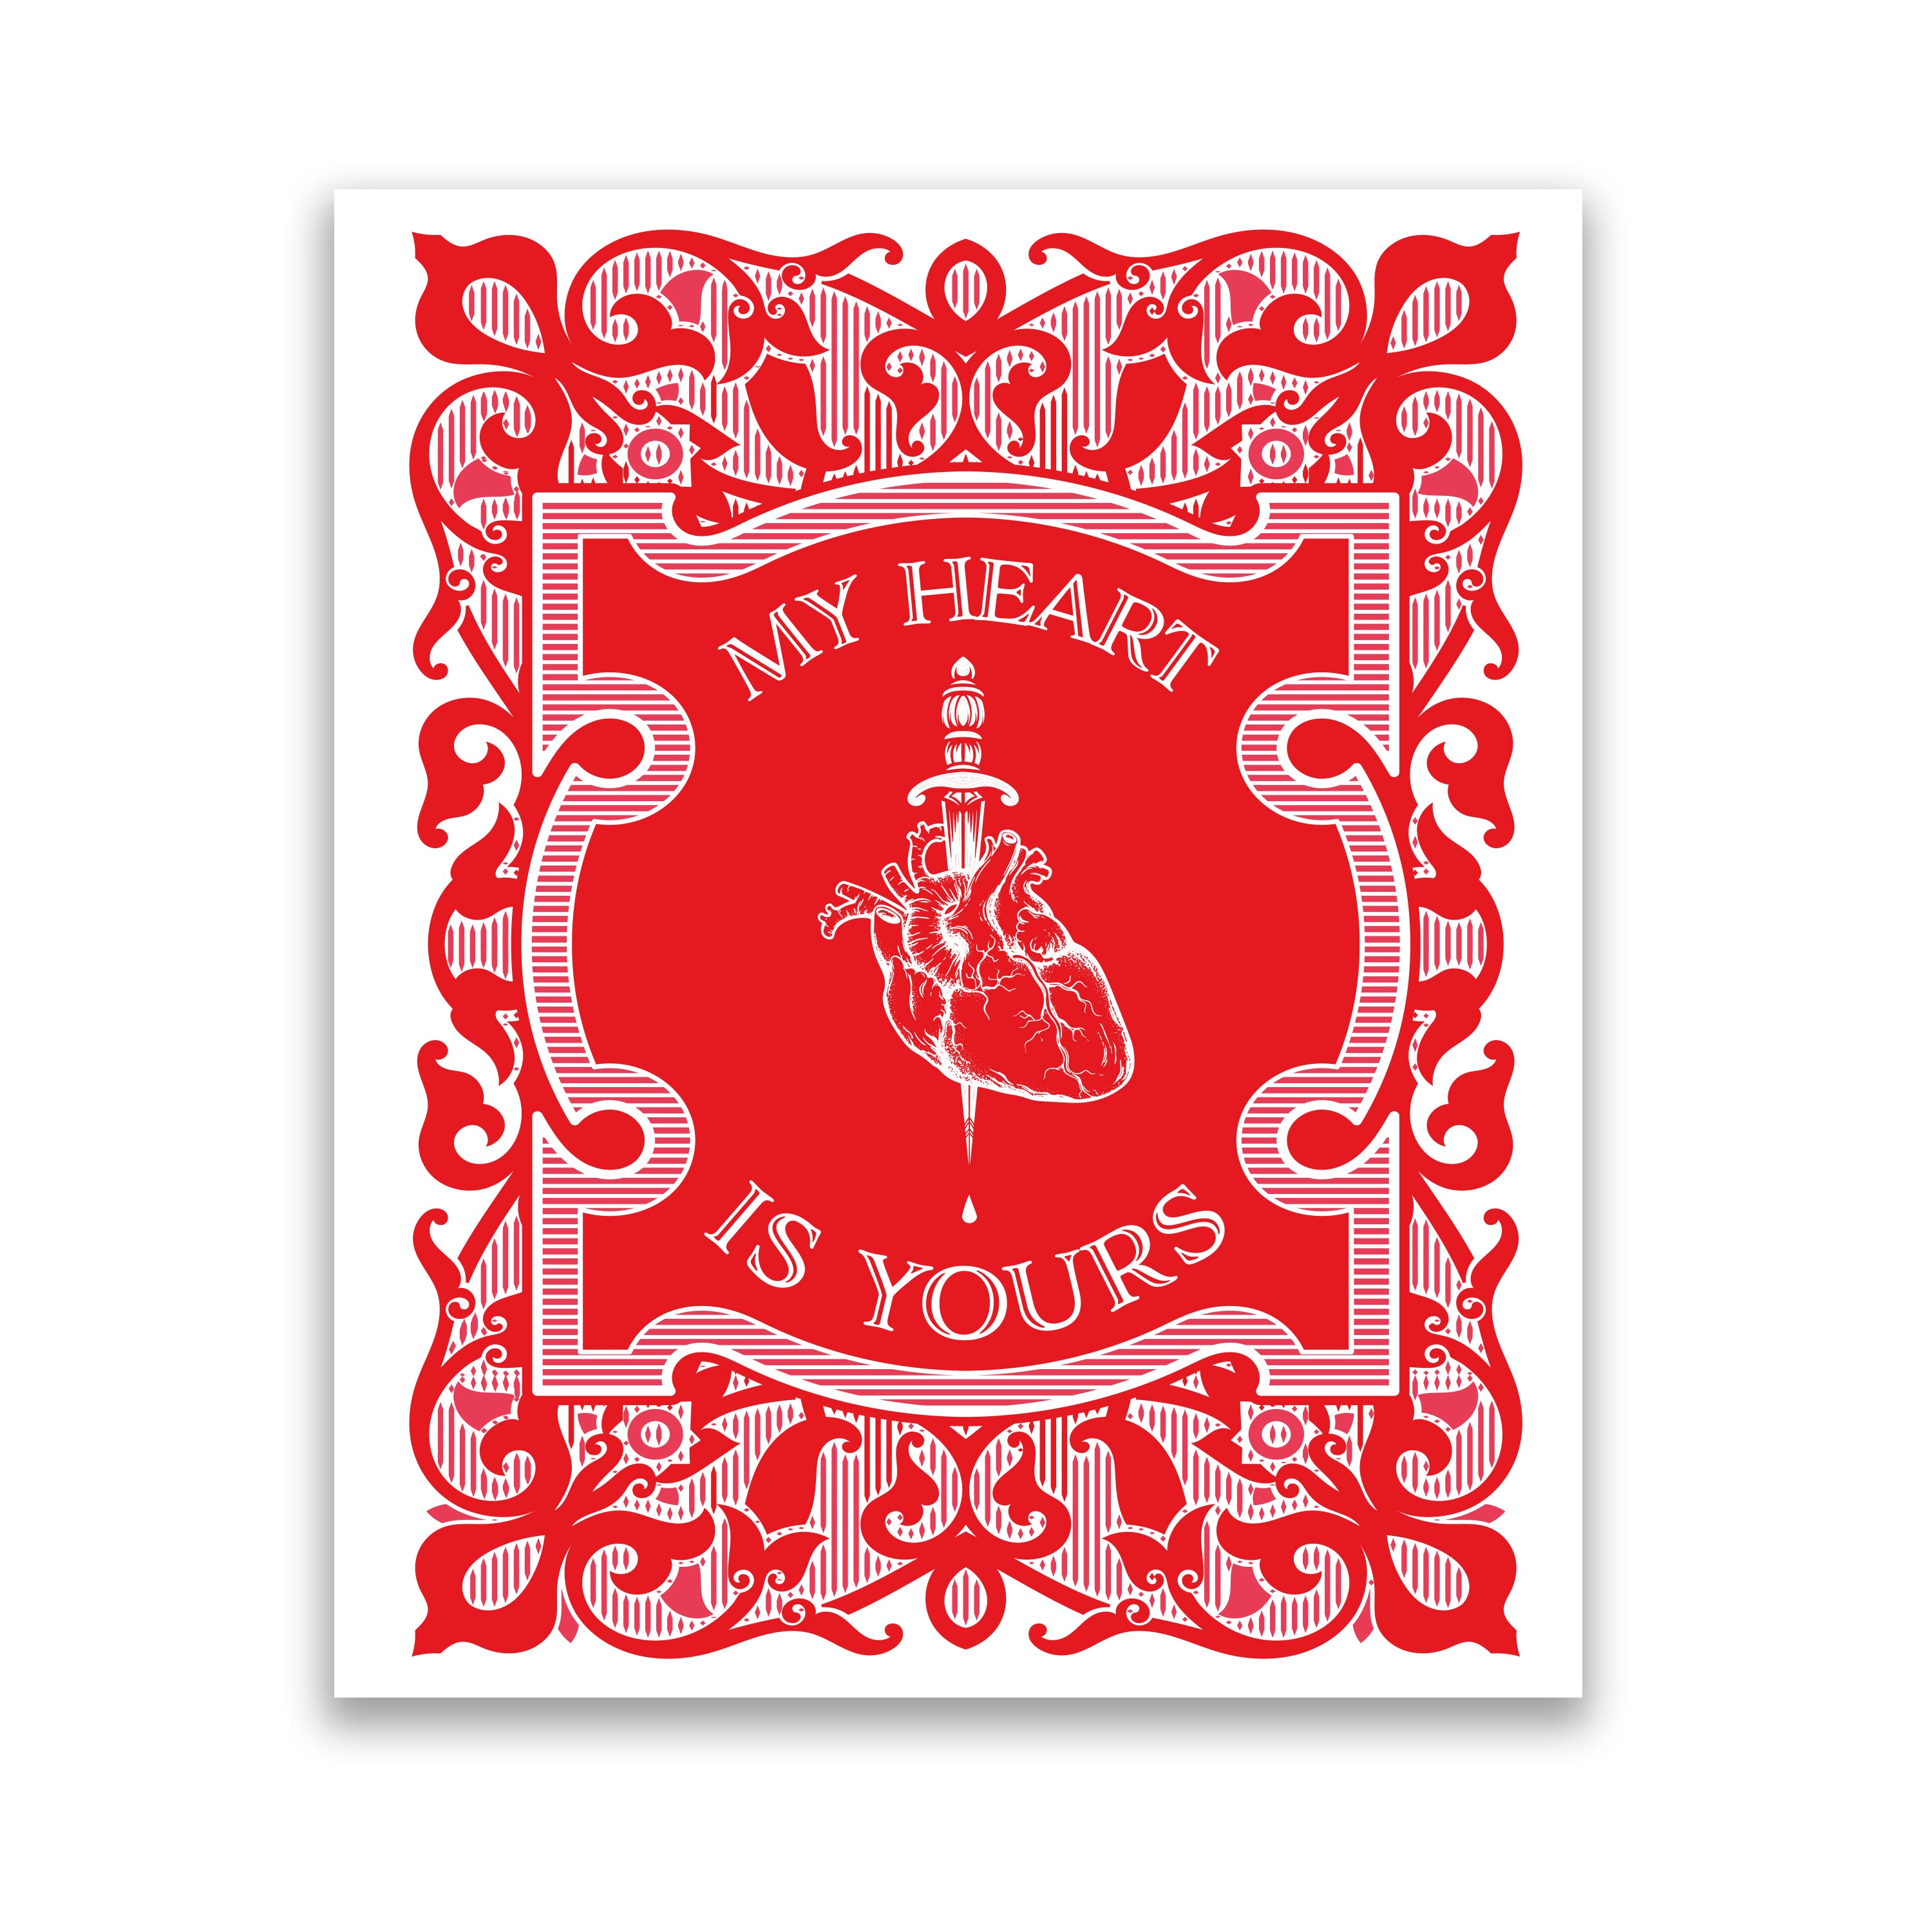 My Heart is Yours Print - Red Edition